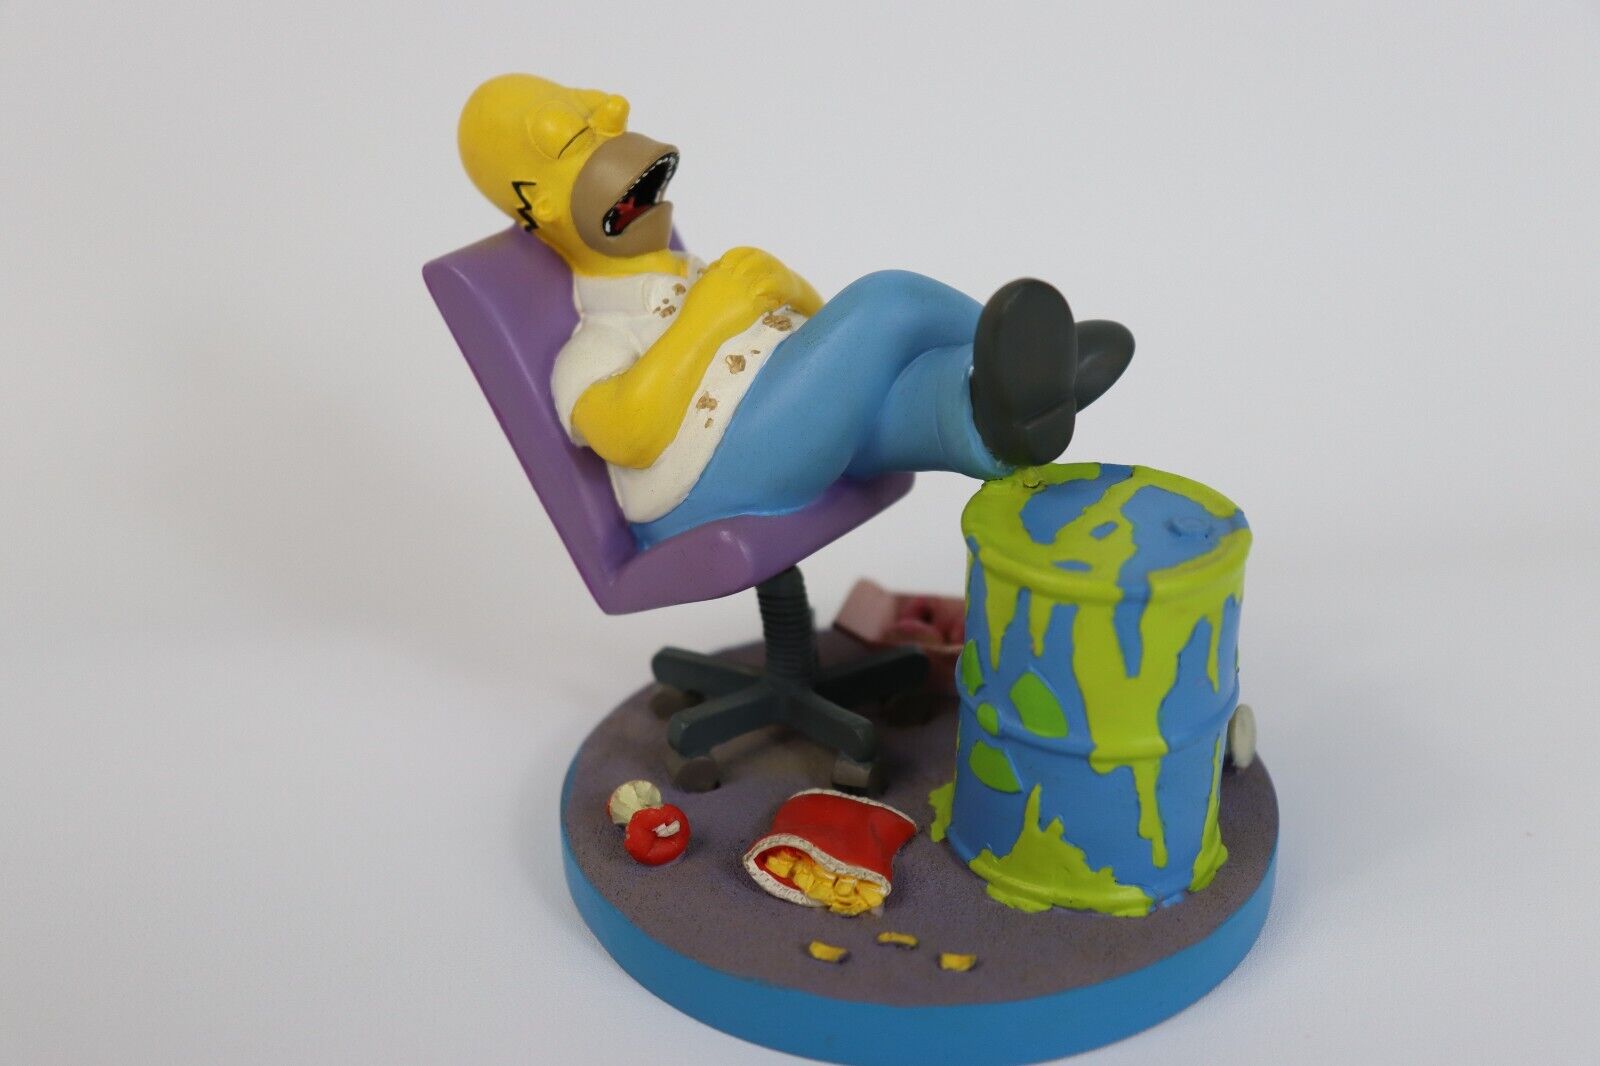 The Simpsons 2001 Misadventures of Homer Sculpture Collection: Asleep on the Job